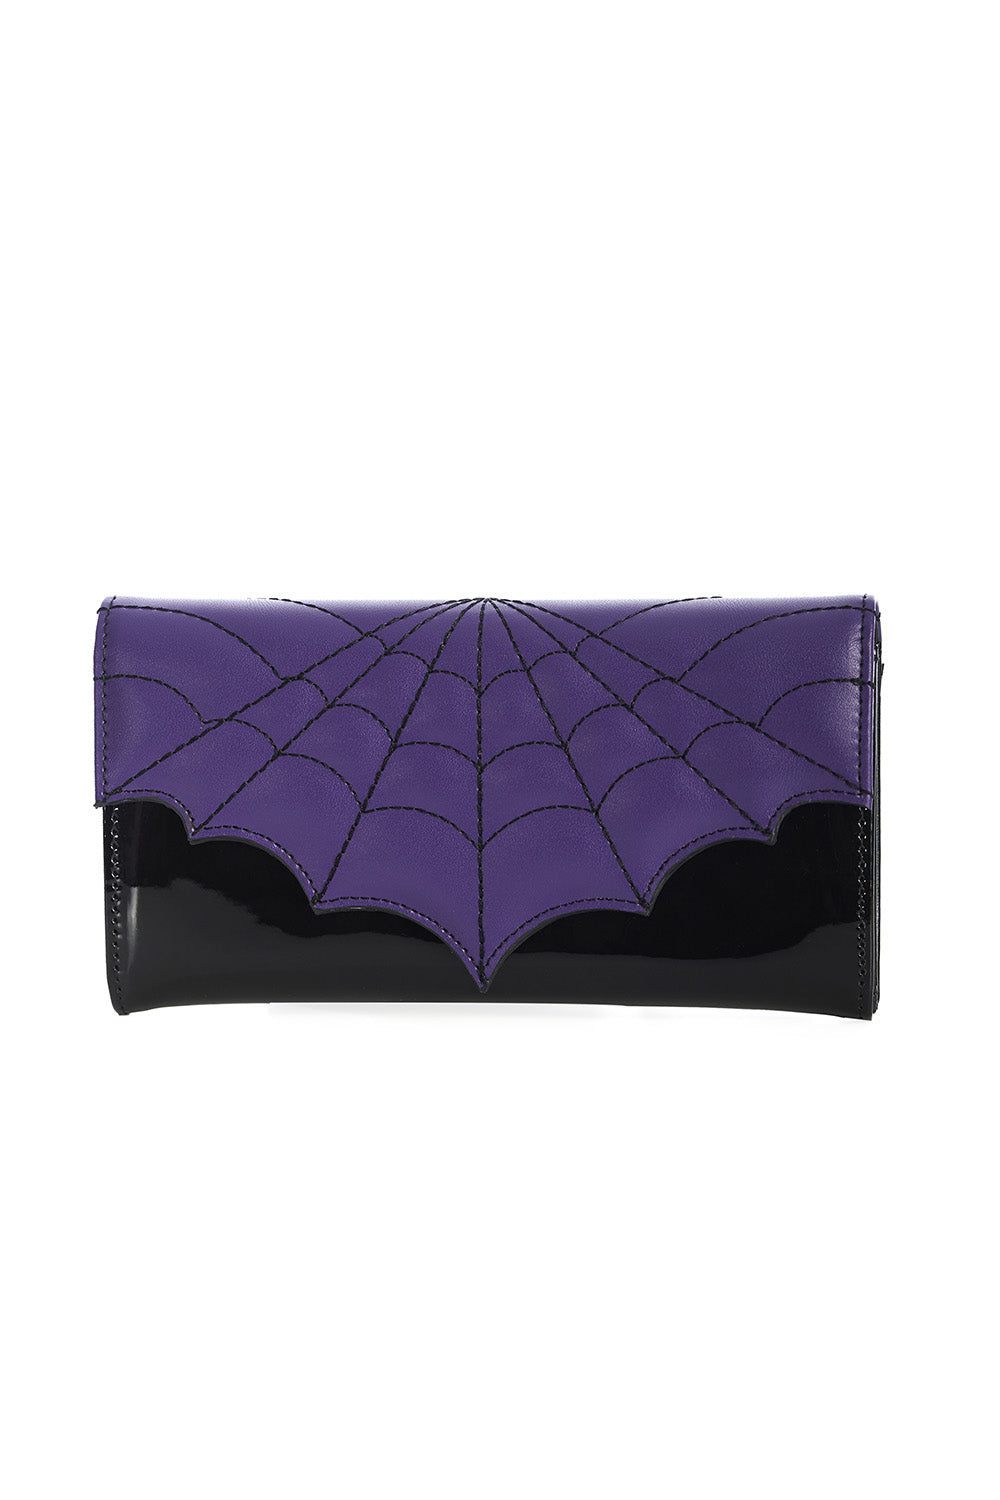 Gods and Monsters Wallet - Purple